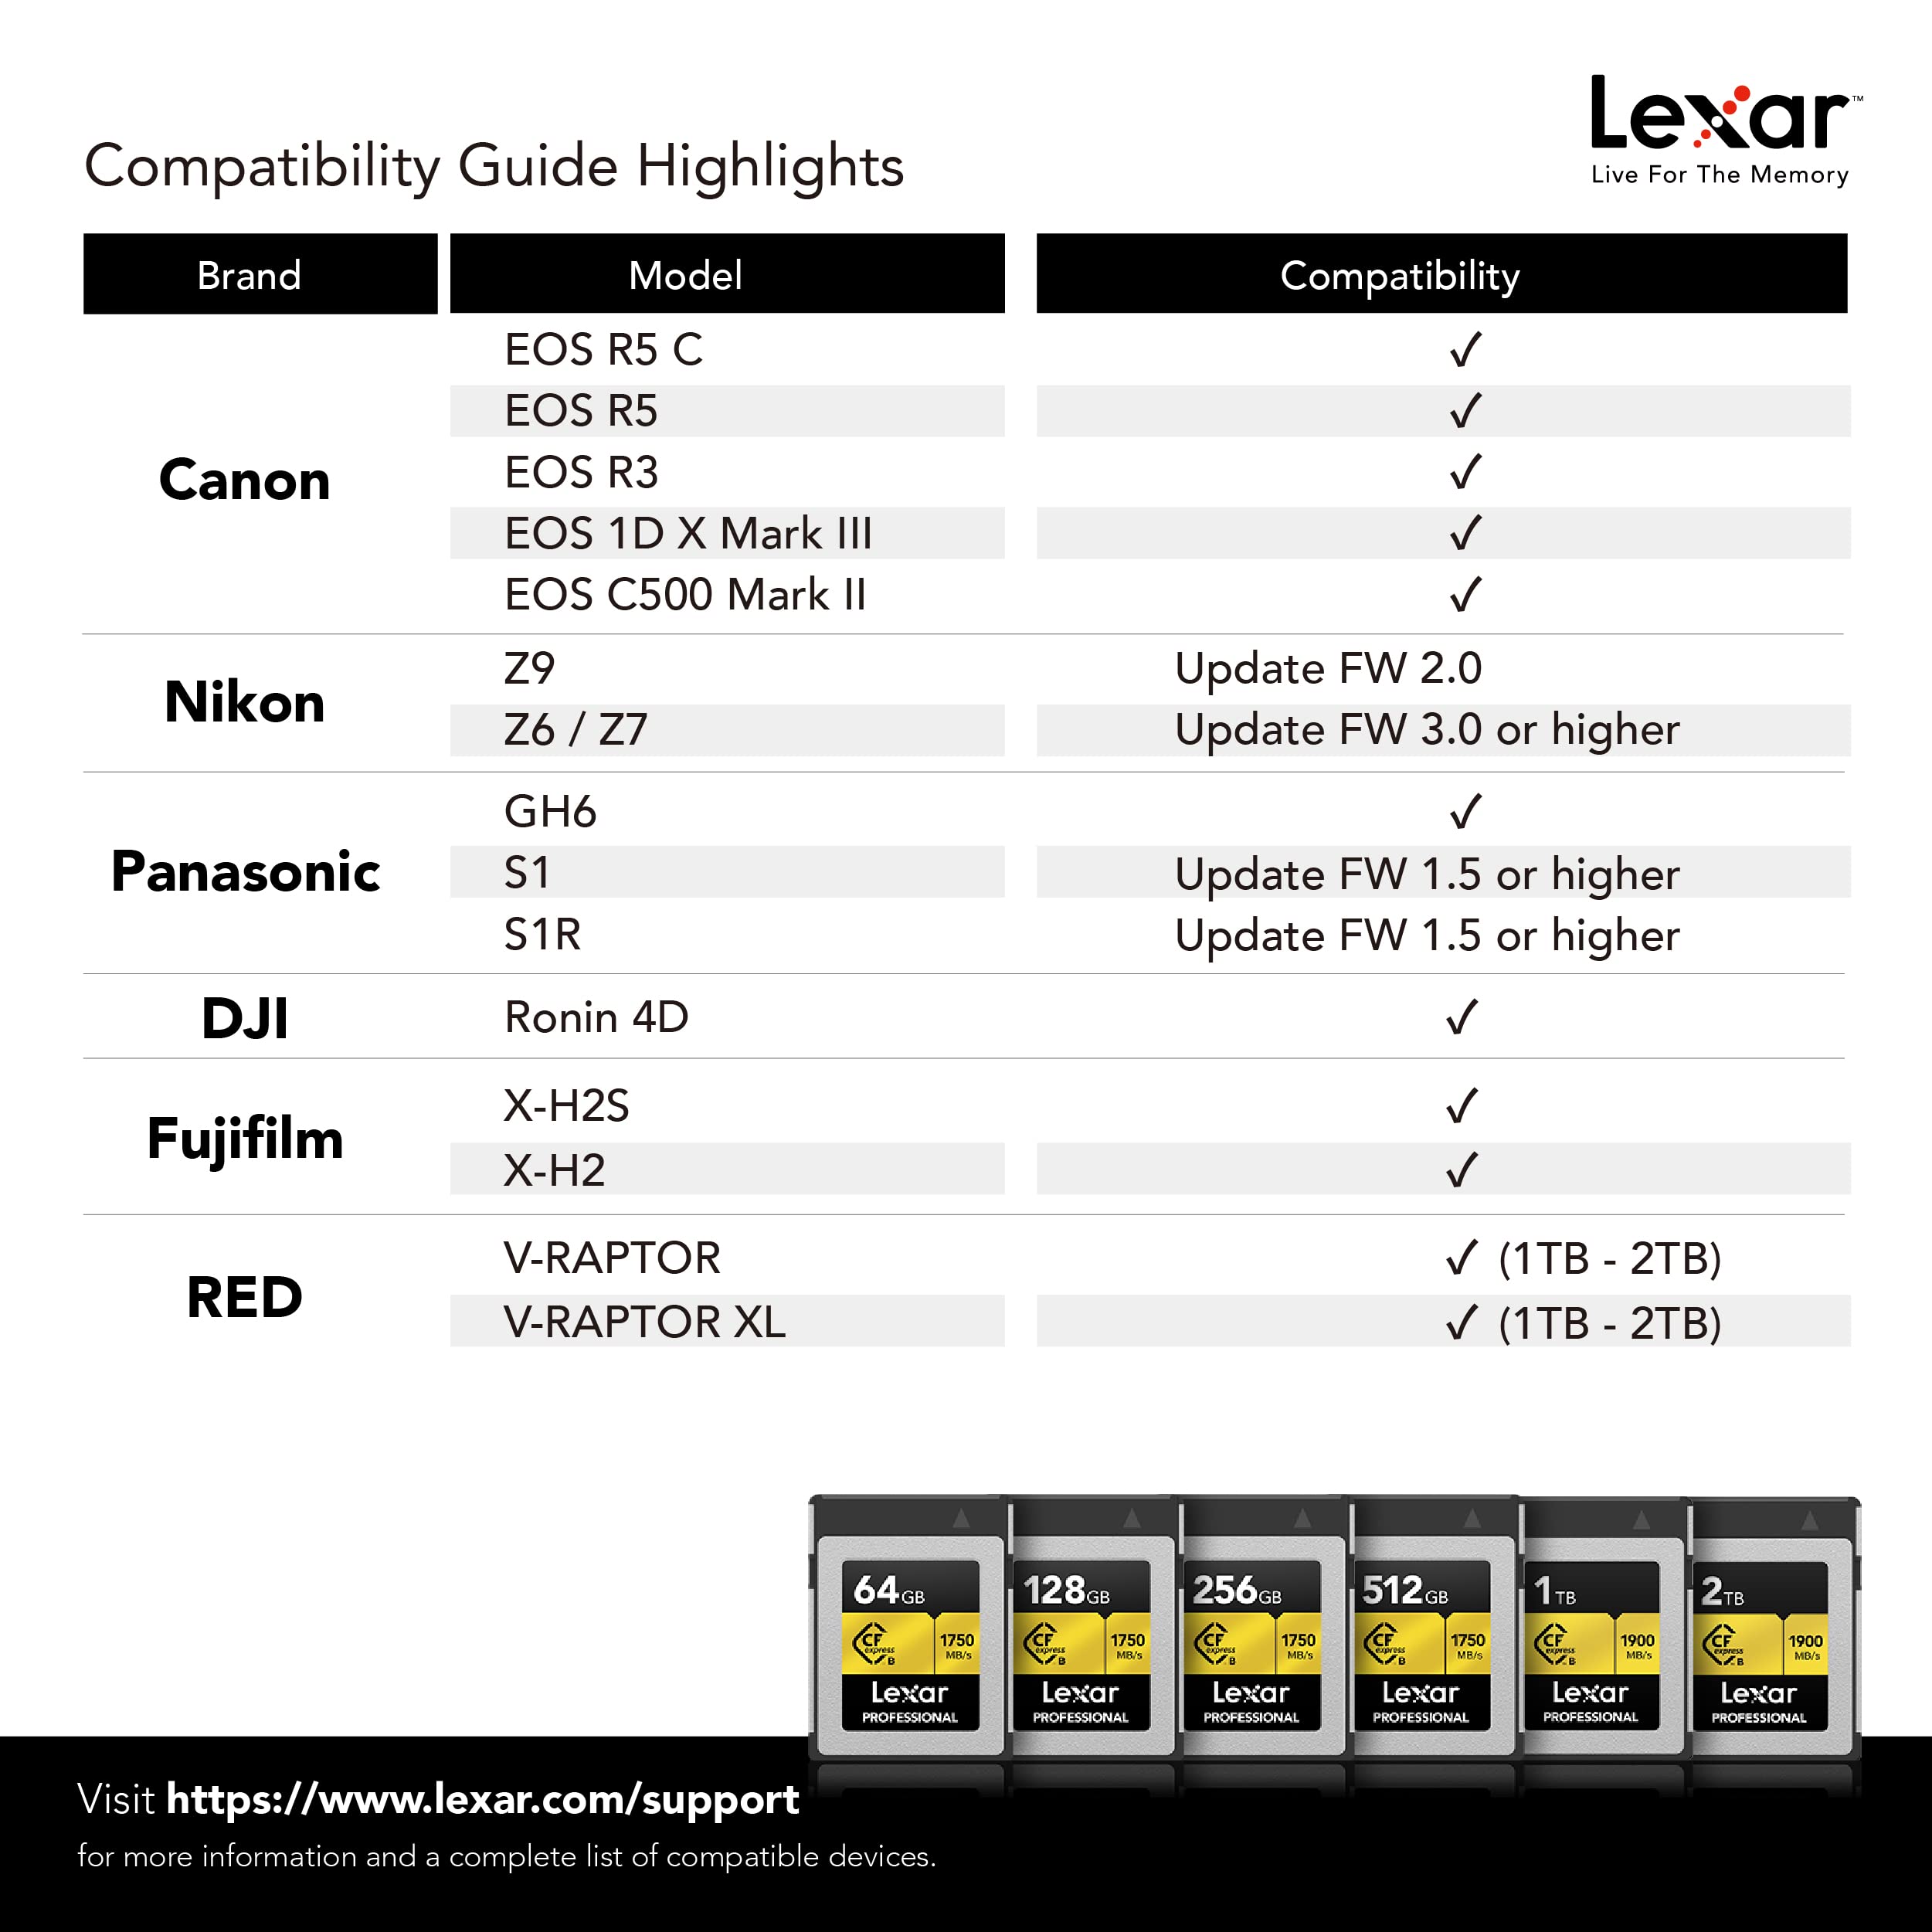 Lexar Professional 512GB CFexpress Type B Memory Card Gold Series, Up to 1750MB/s Read, Raw 8K Video Recording, Supports PCIe 3.0 and NVMe (LCXEXPR512G-RNENG)